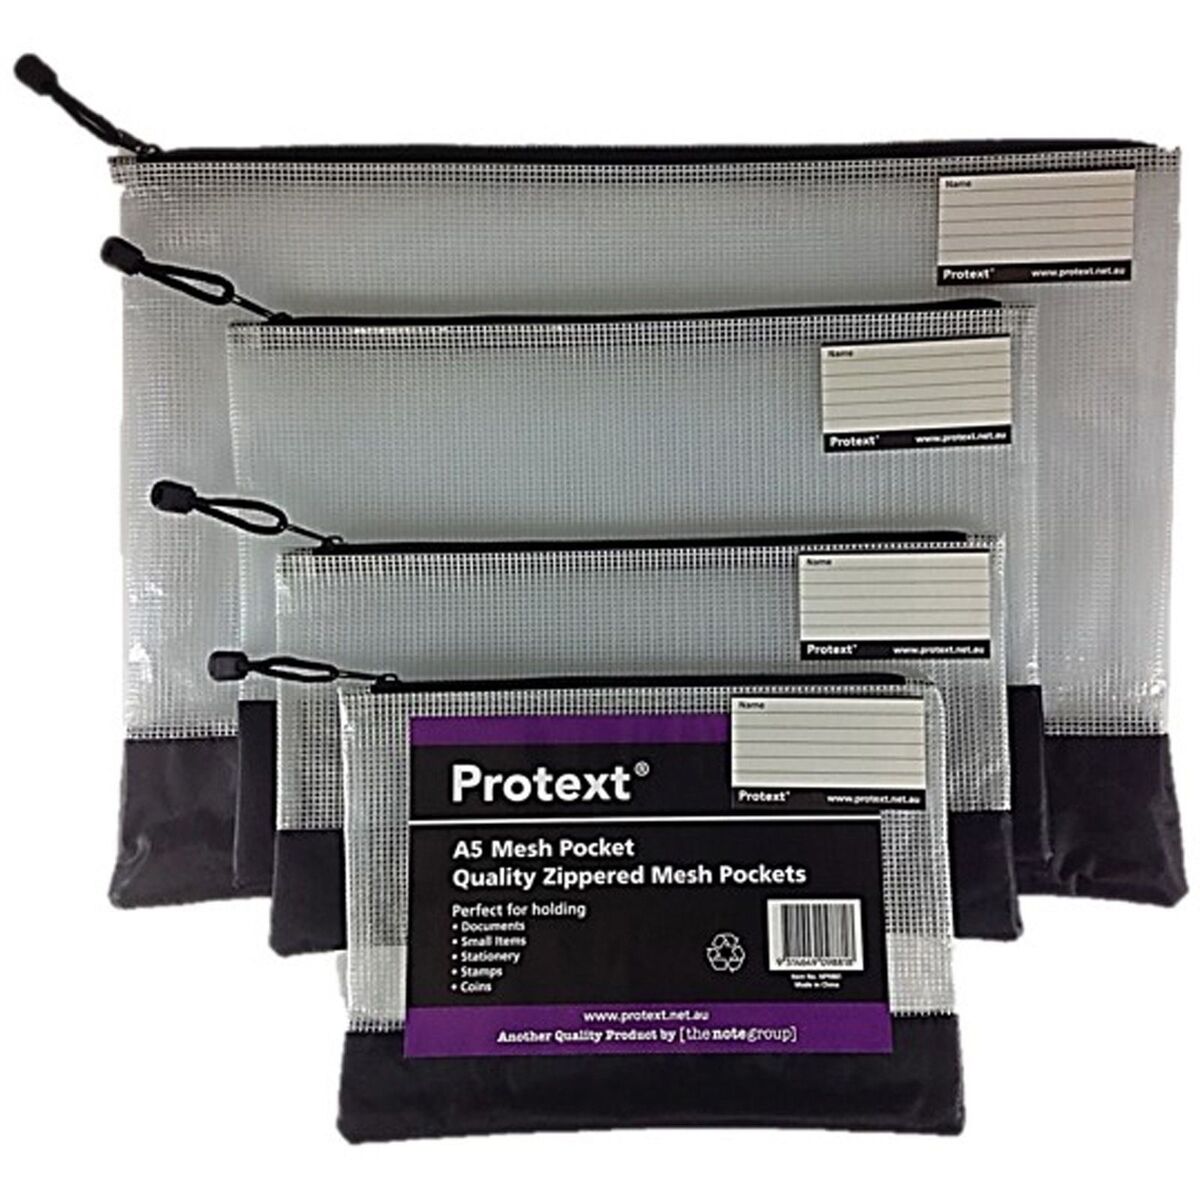 PROTEXT A4 MESH POCKET POUCH White Assorted Trim 380x270mm